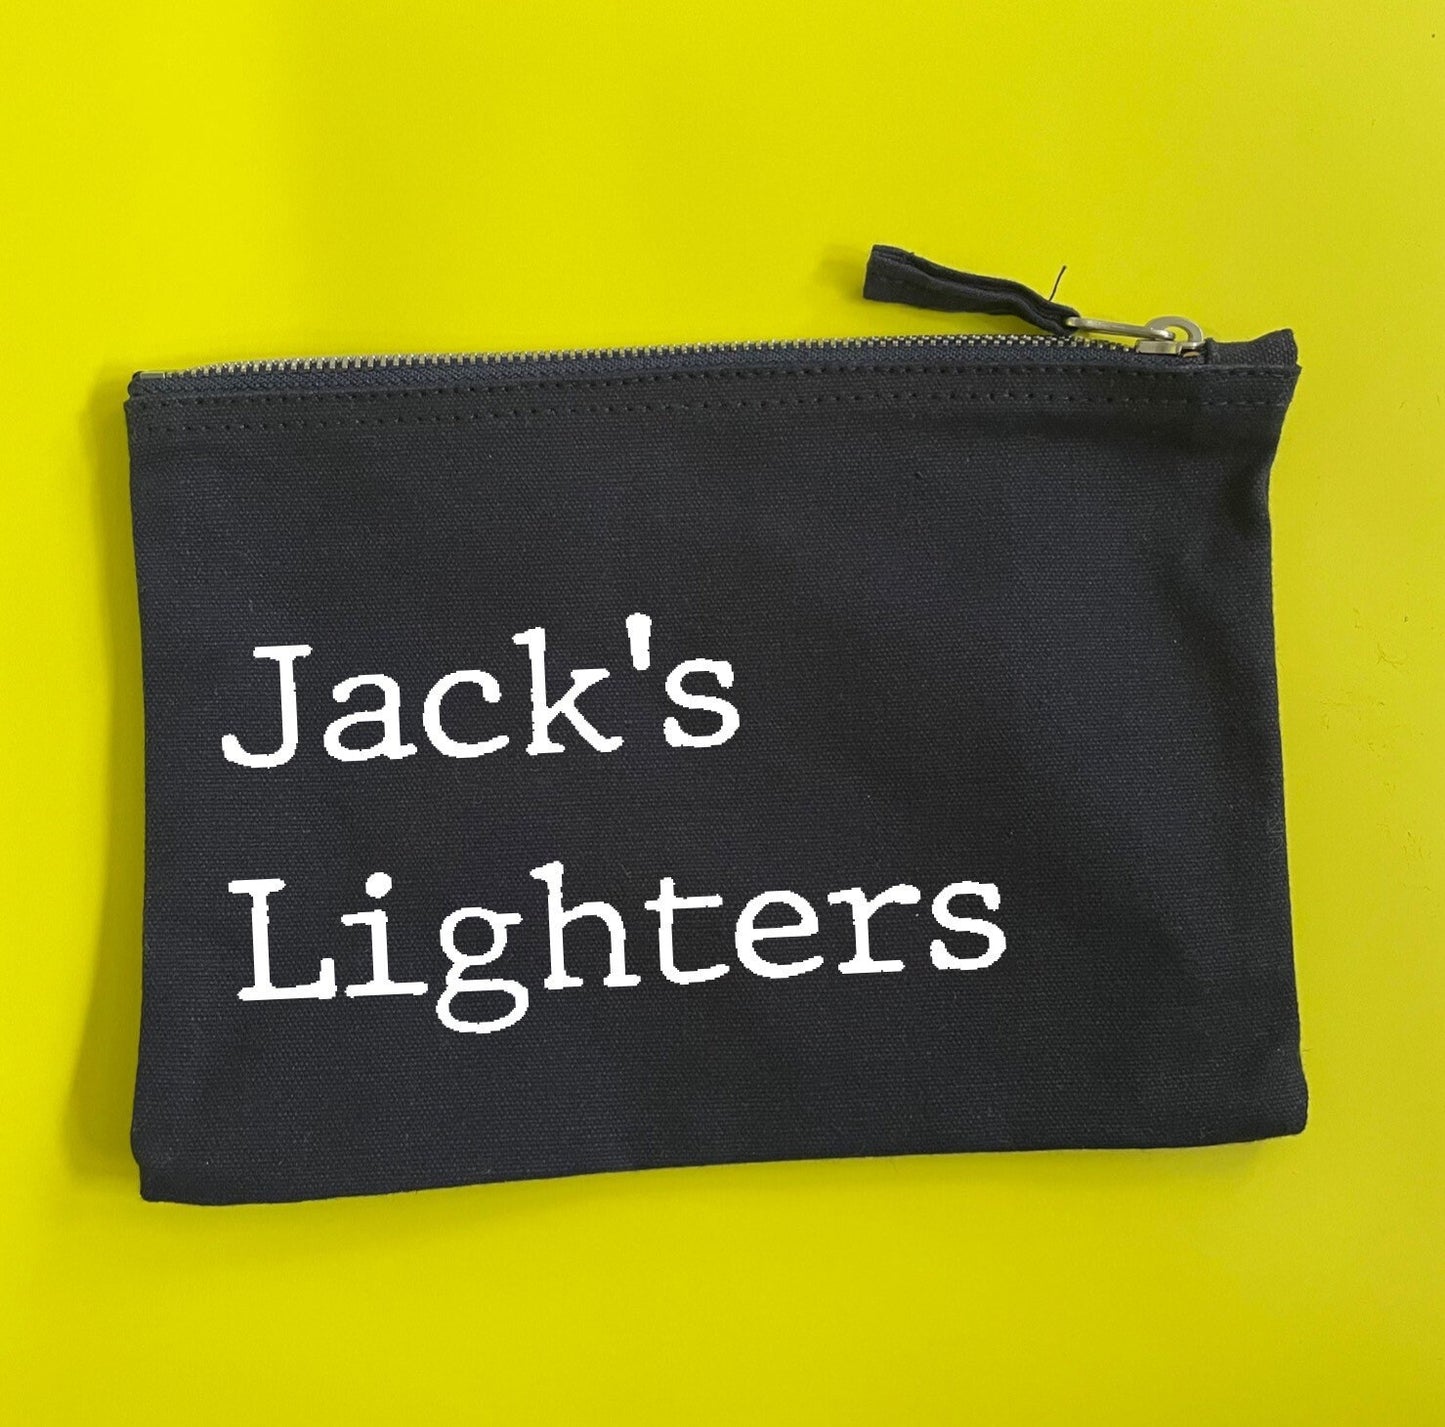 Lighter pouch, personalised lighter case, gifts for friends, Christmas gift for men smokers, cigar lighter storage